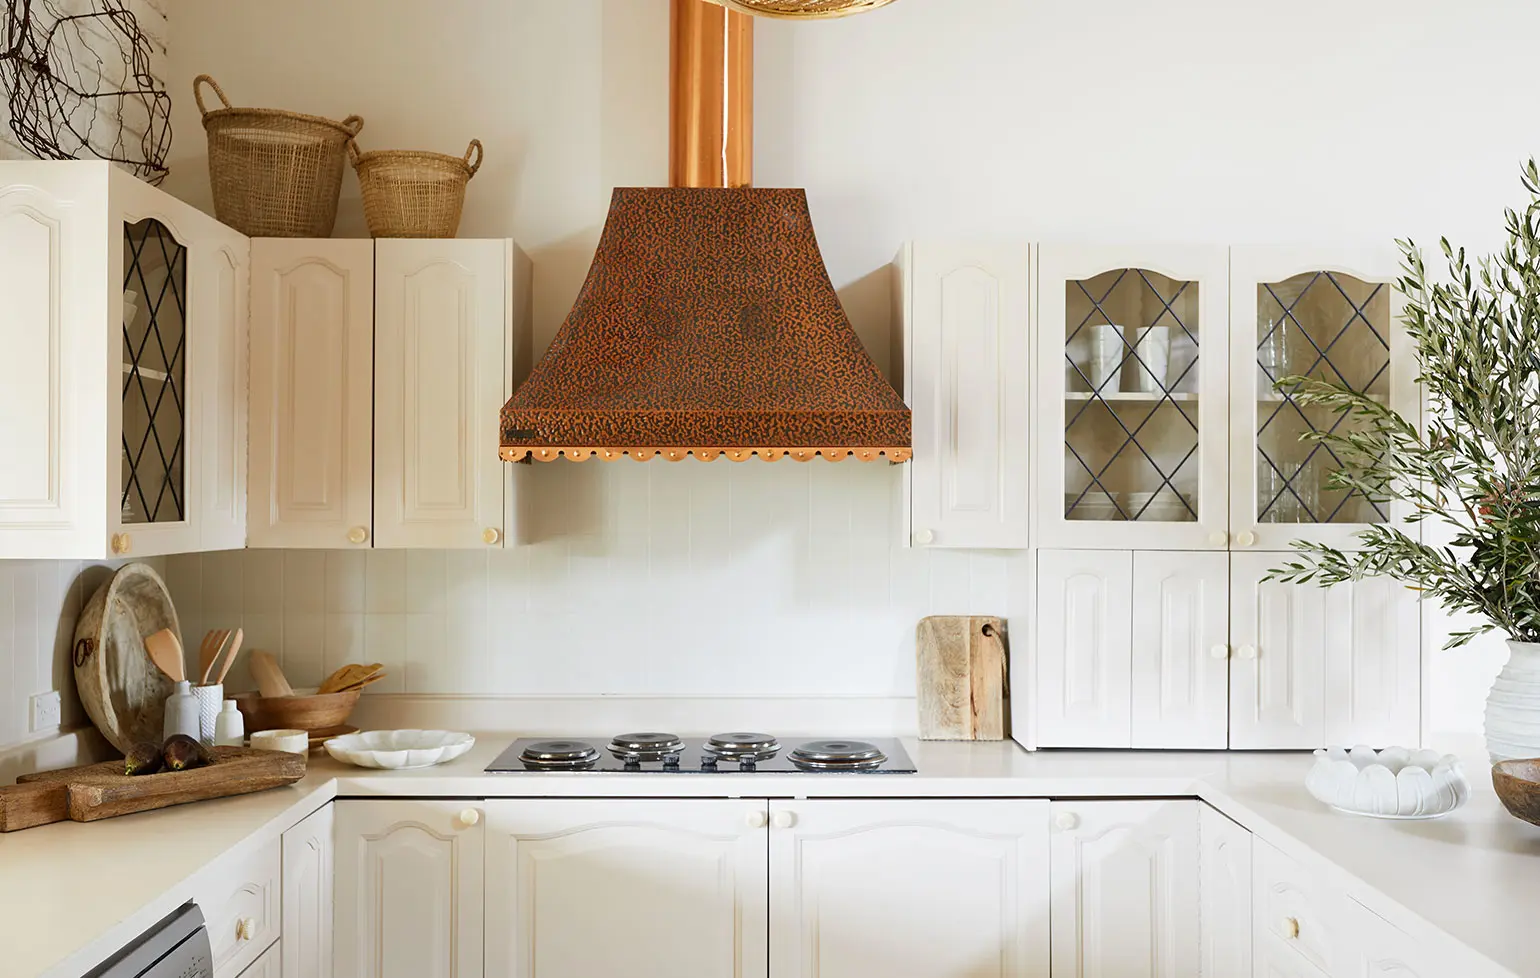 Rustic kitchen with large brass exhaust fan